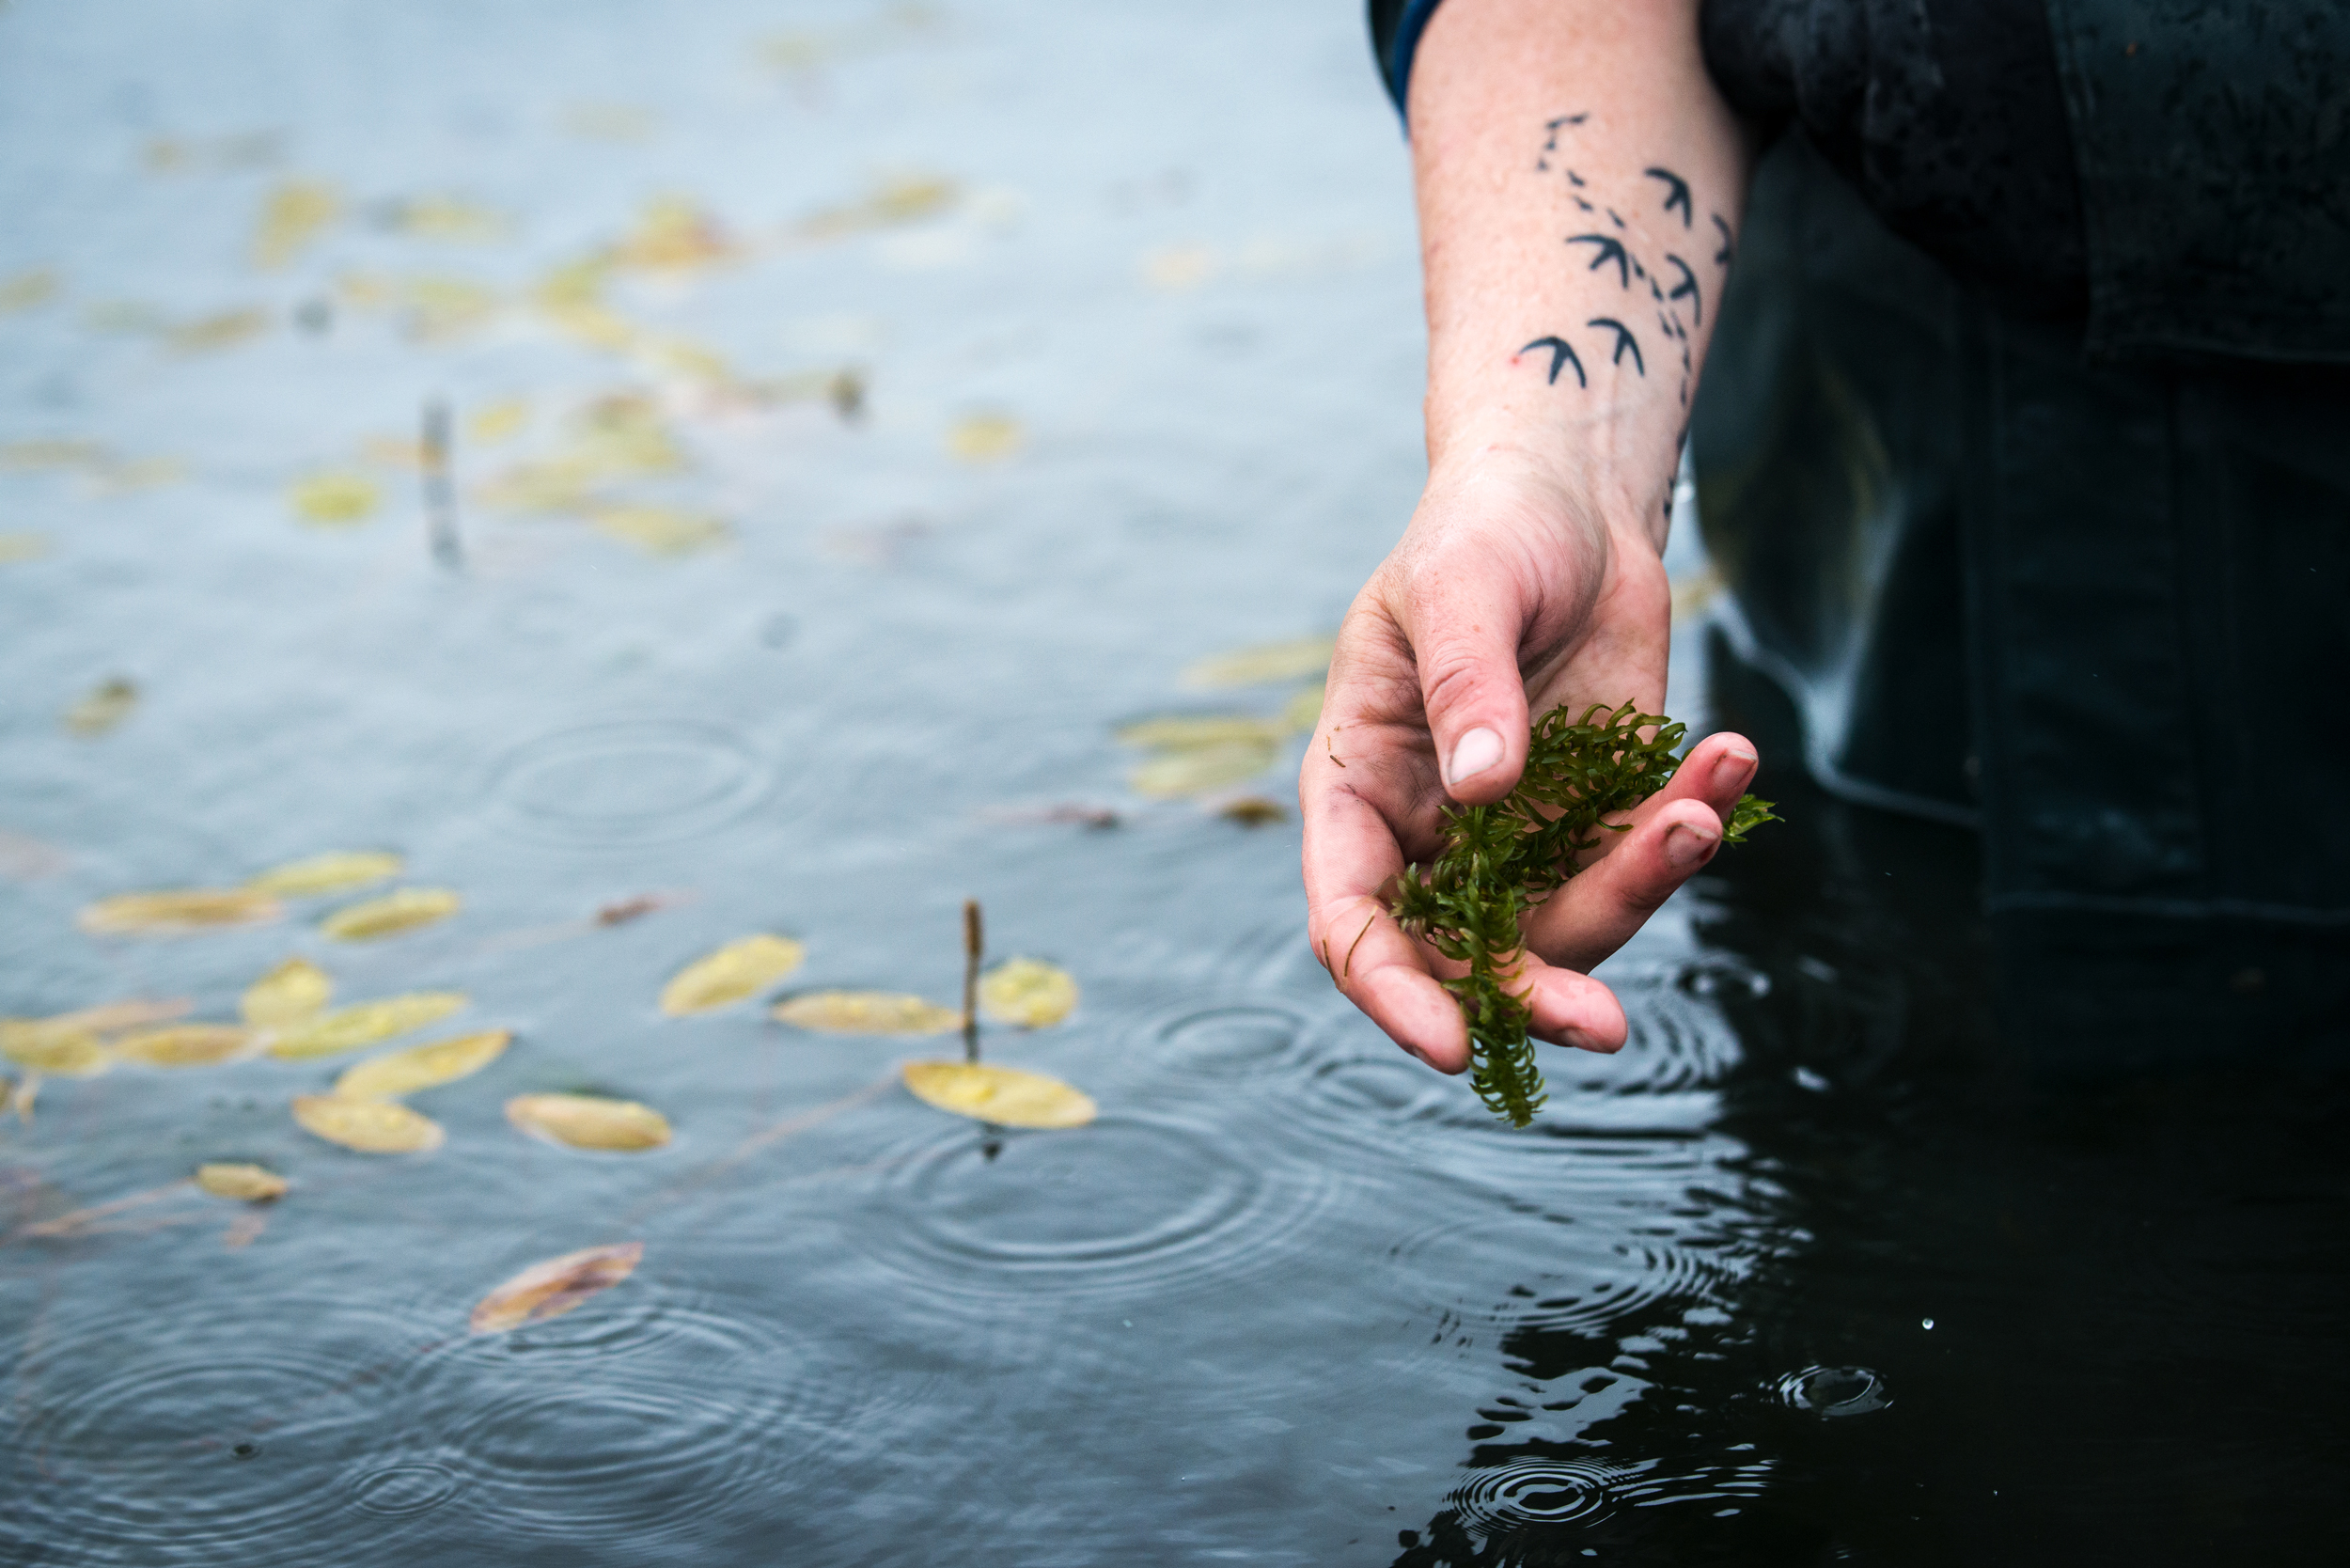  We stopped so Gabrielson could show me what Elodea, an invasive plant species to Alaska, looks like up close. In this moment, I caught a glimpse of her tattoos, tiny foot prints of water fowl species Gabrielson has worked on in the past, that she ke